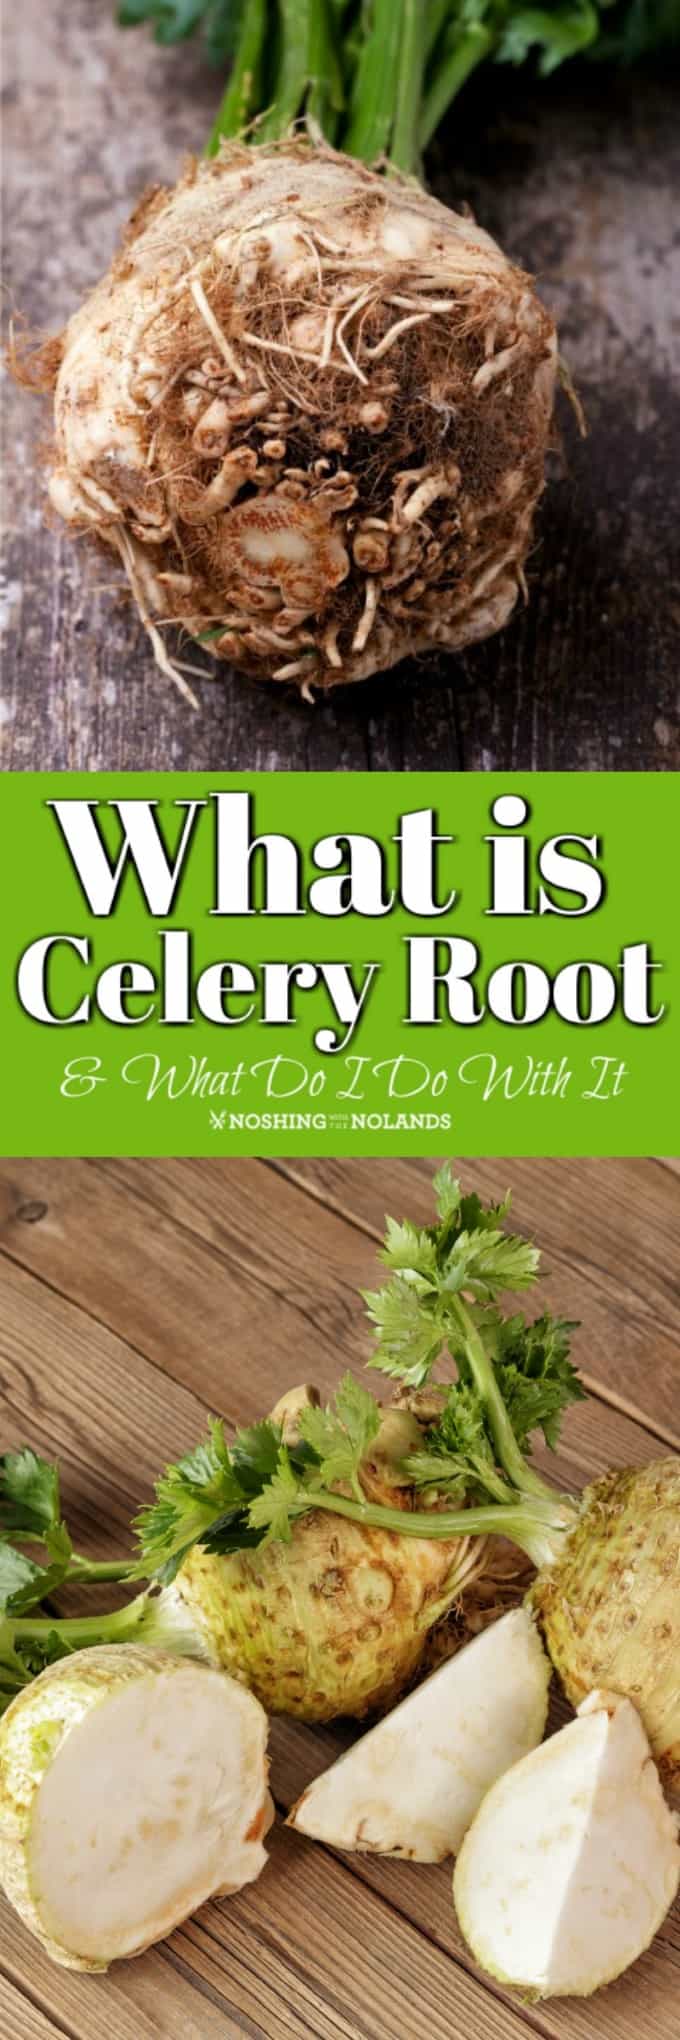 What is Celery Root and What Do I Do With It? How to cook, peel and eat is explained in this easy read so you can try something perhaps new!! #celeryroot